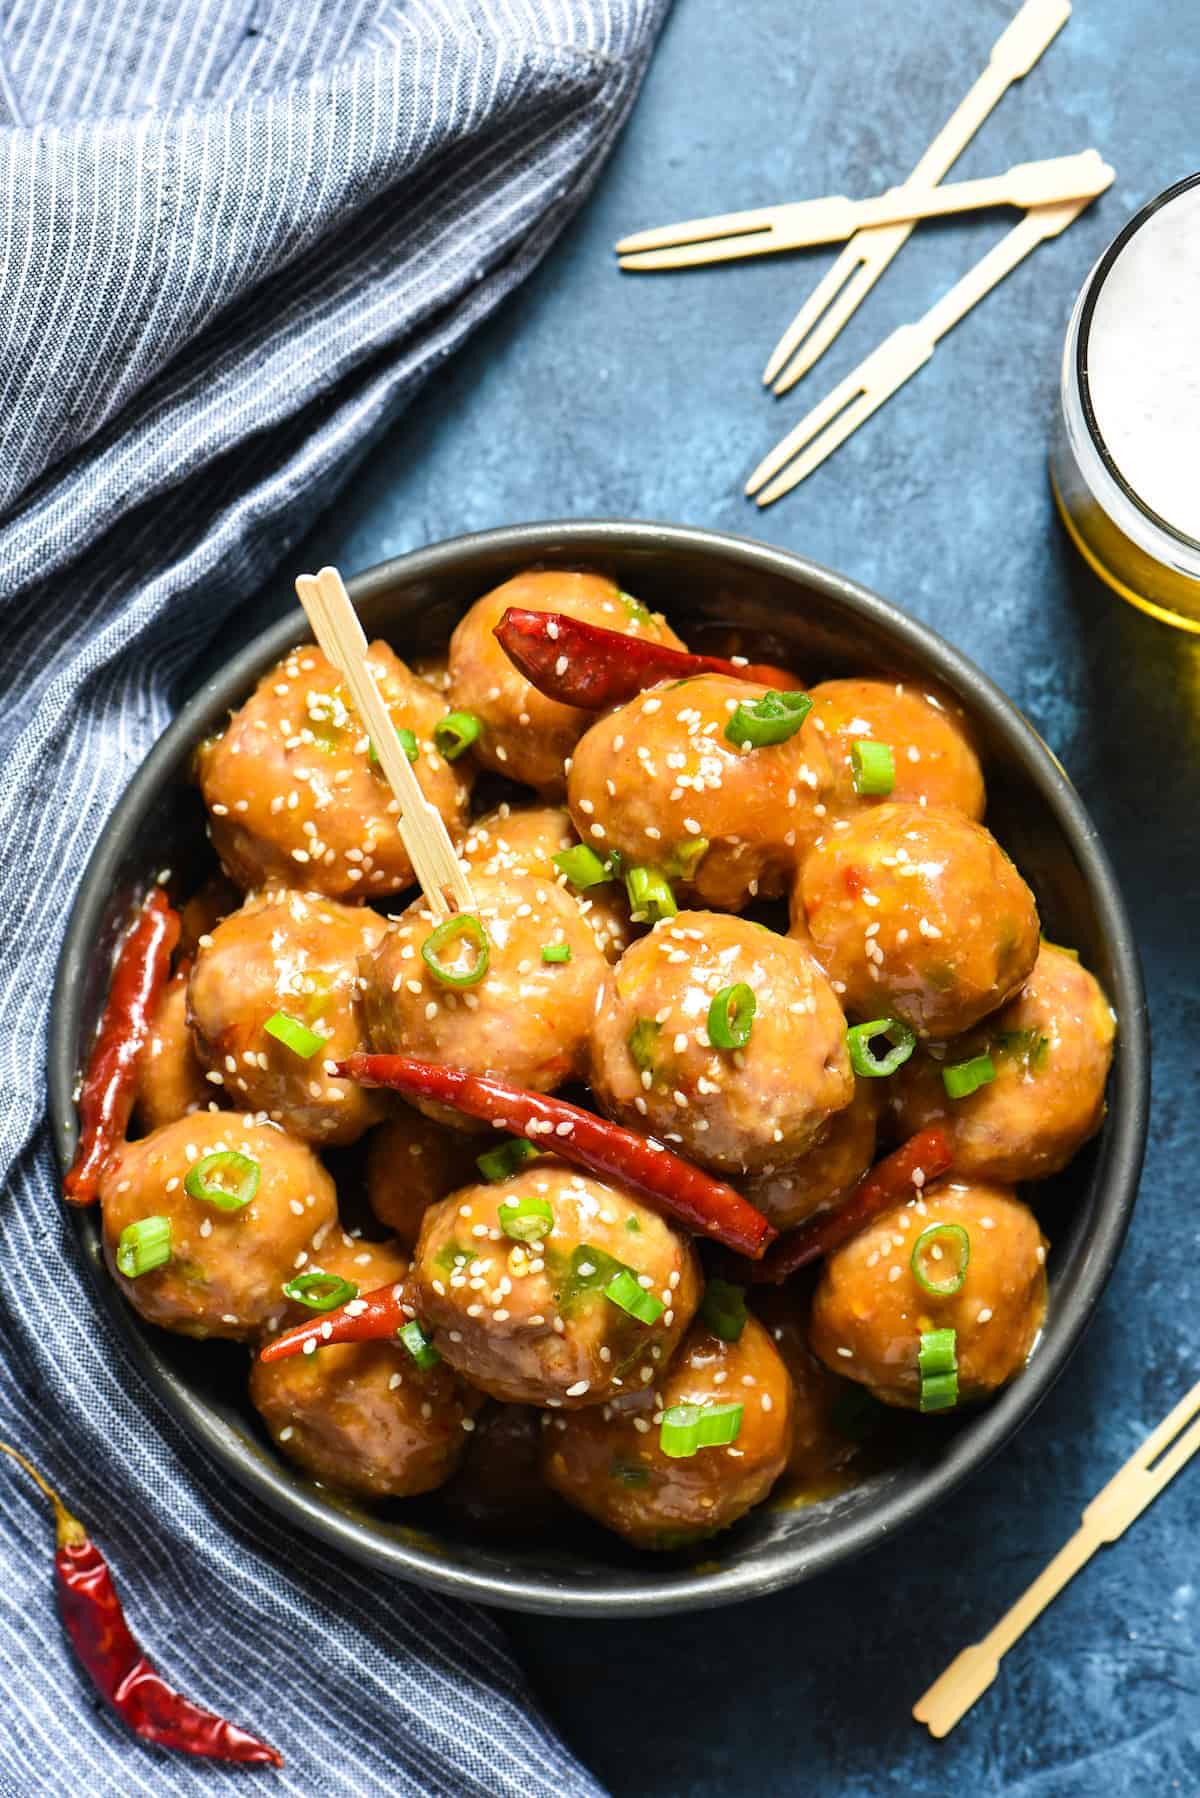 Chinese meatballs in a bowl on a blue background.